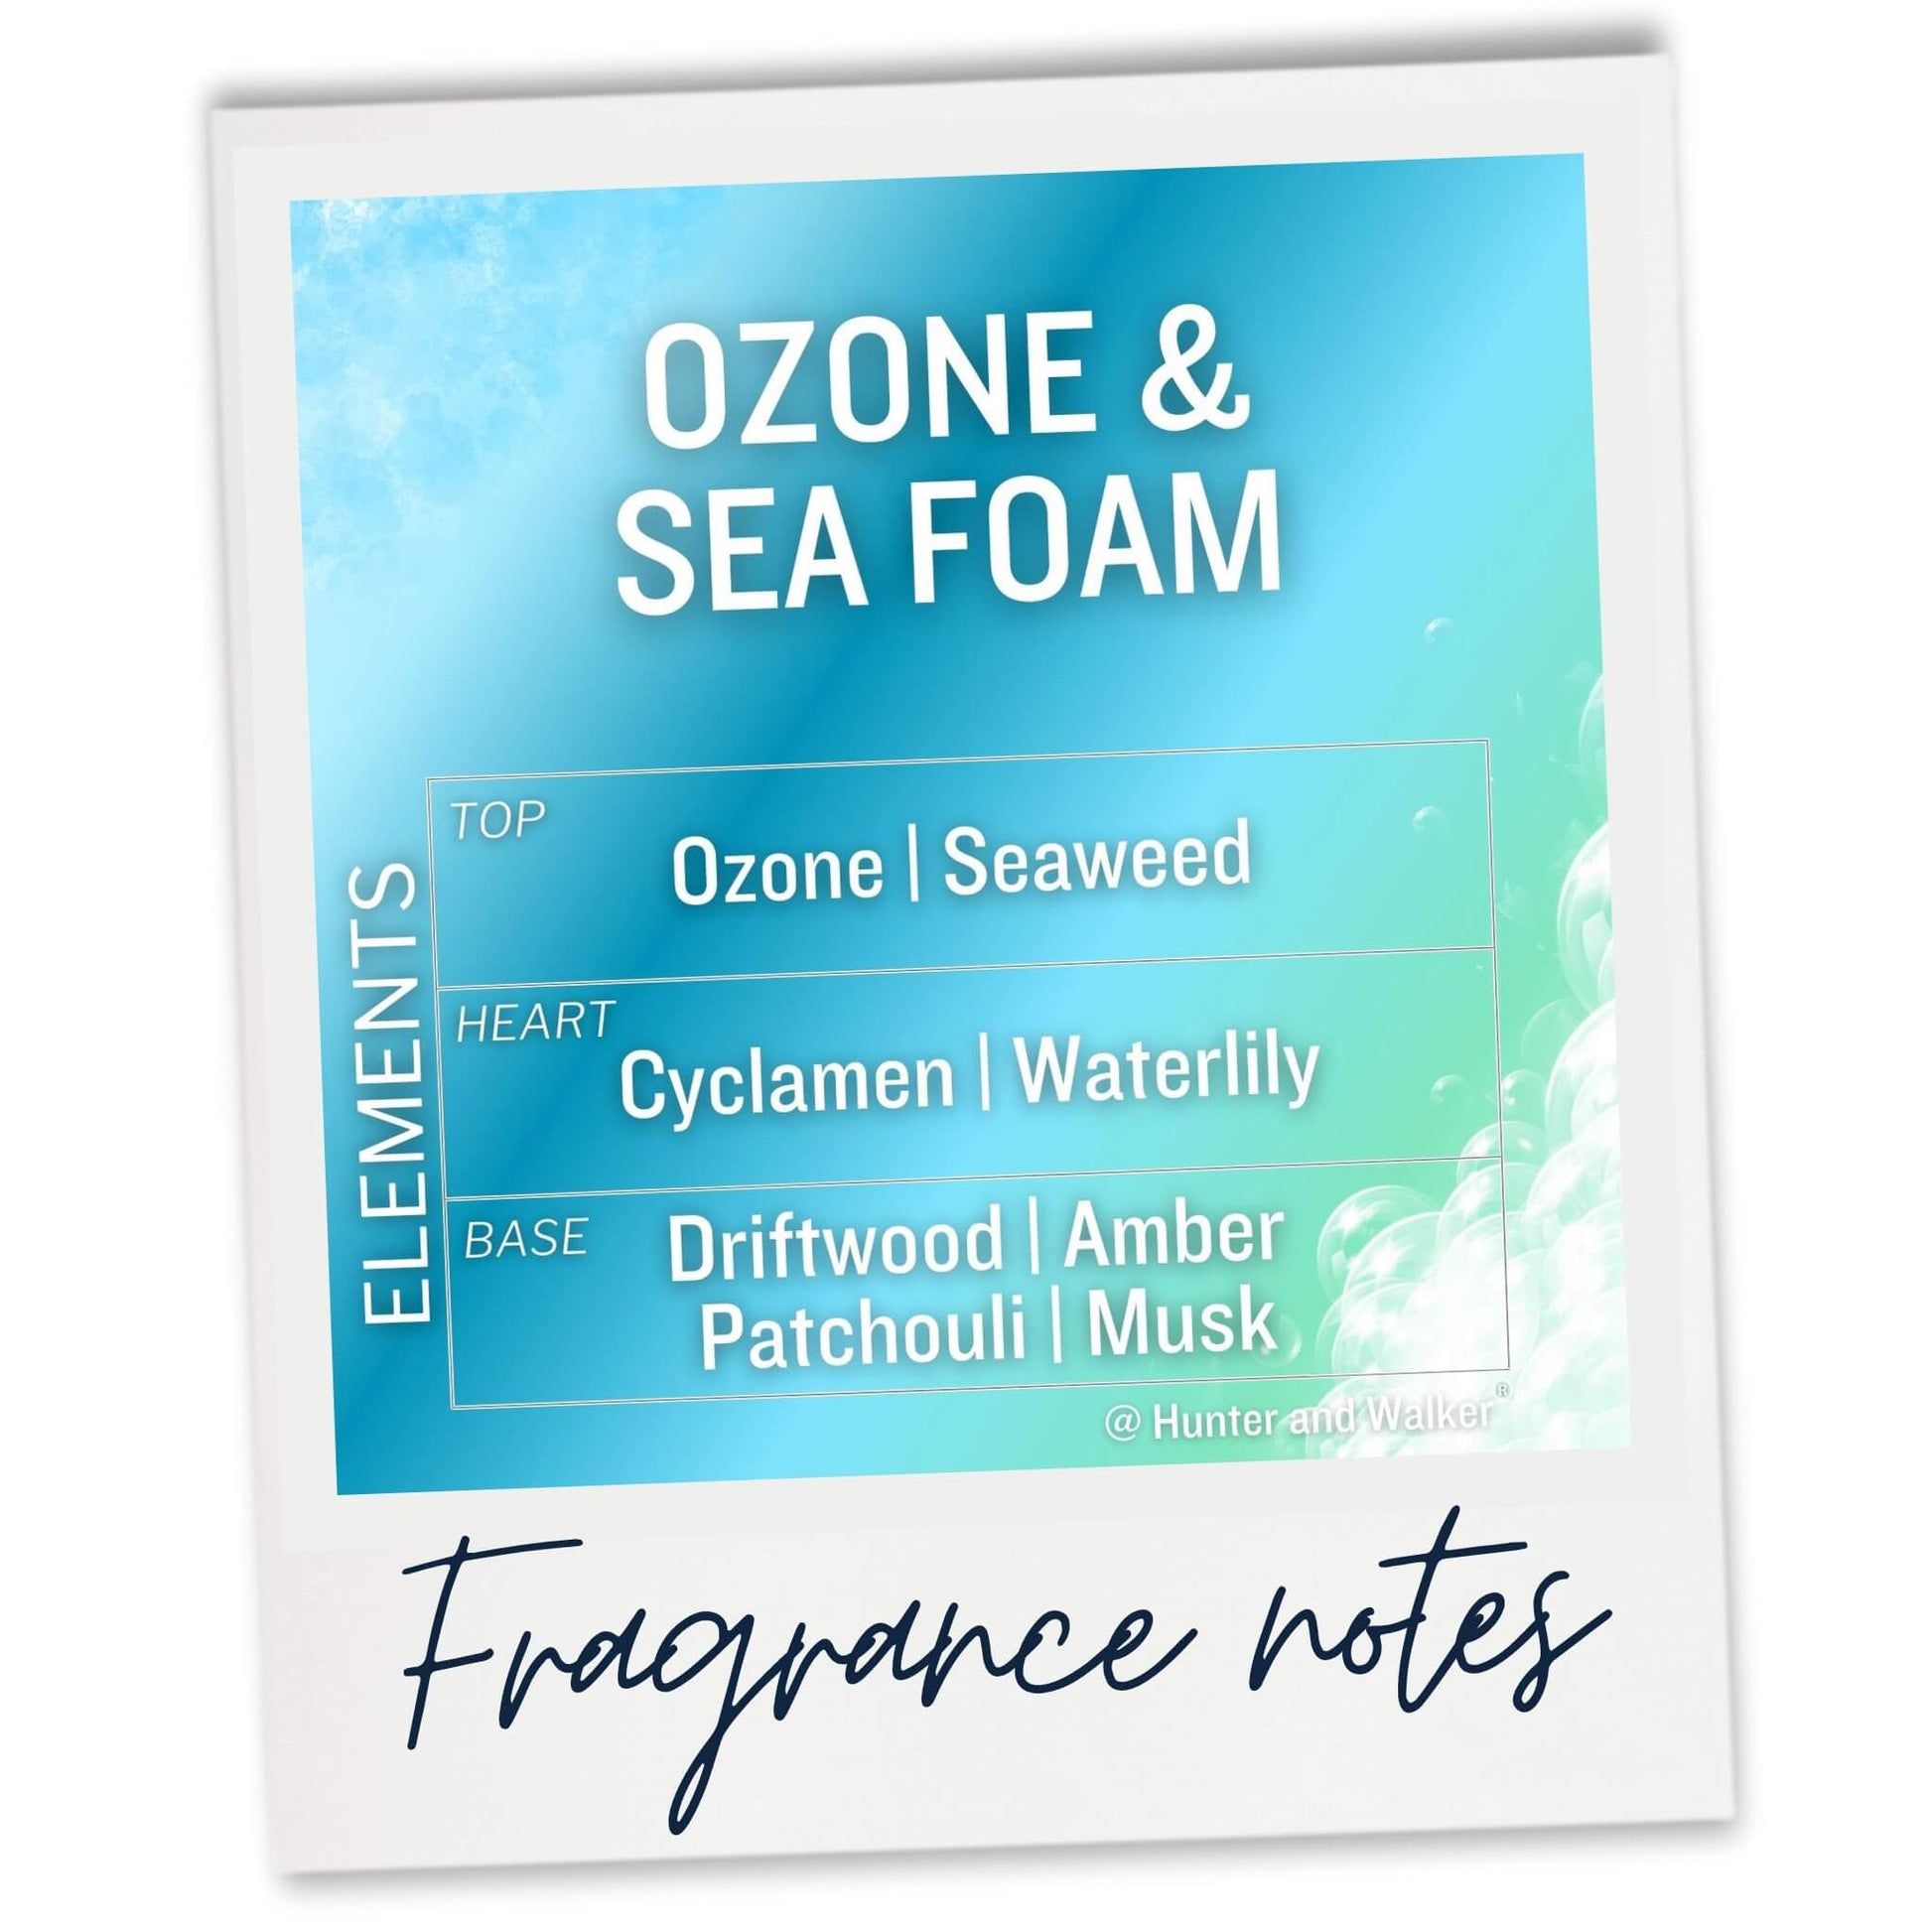 The fragrance notes of Ozone and Seafoam wax melt sample are a calming marine scent opens with a refreshing ozonic accord and delicate powdery notes of Cyclamen and Water-Lily.  All floating on a sparkling sea salt-encrusted base of Driftwood, Amber, Patchouli and Musk.